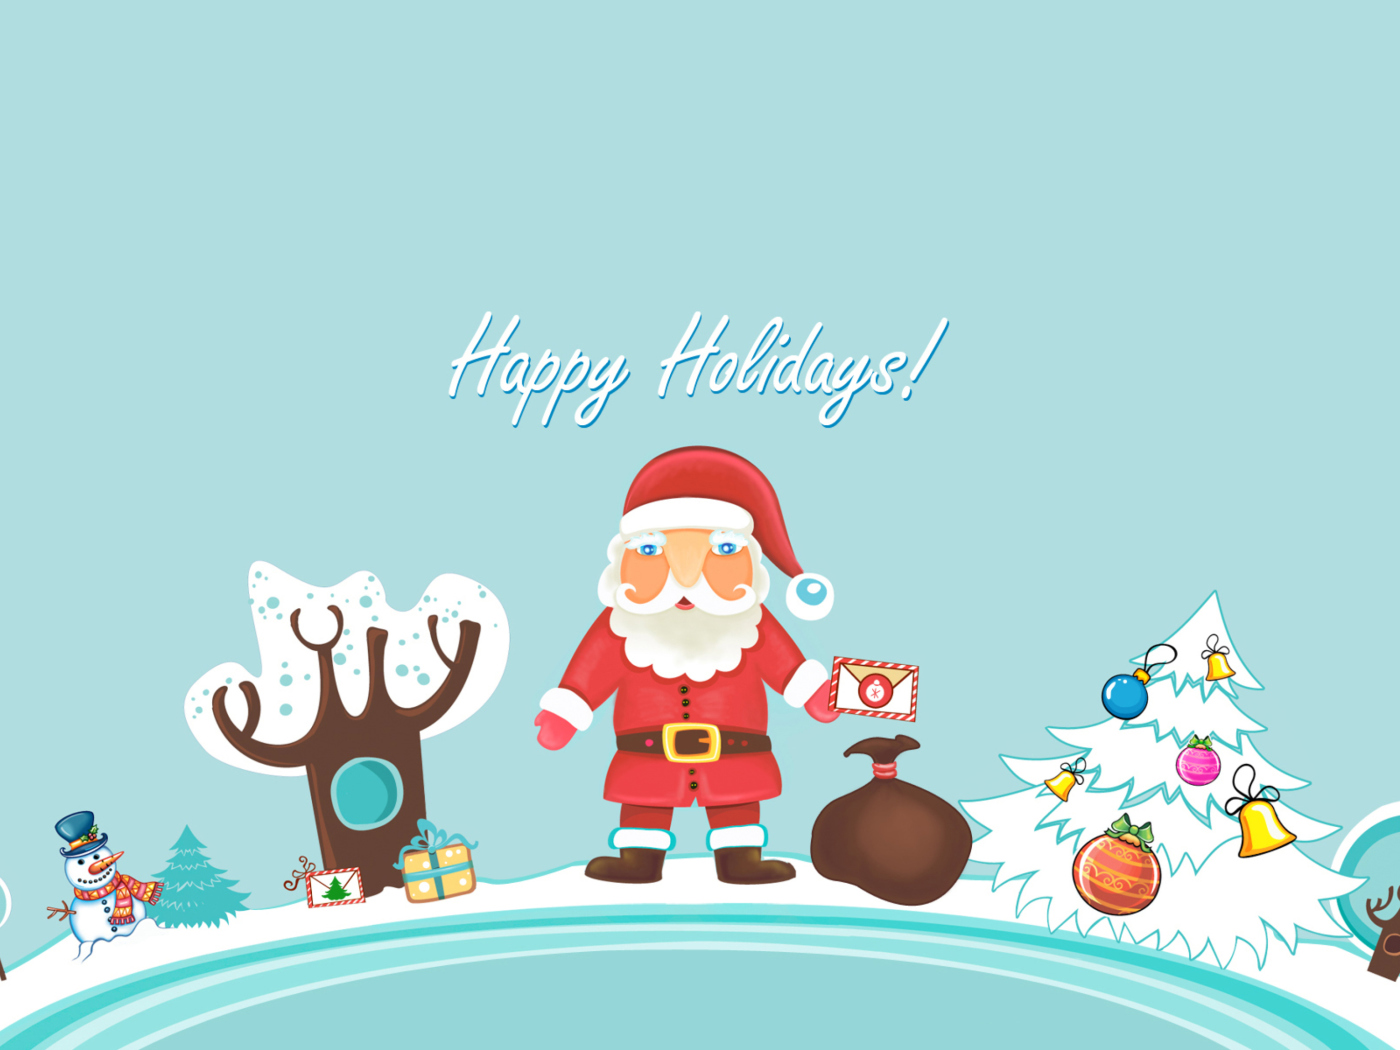 Santa Claus Wishes You Happy Holidays wallpaper 1400x1050